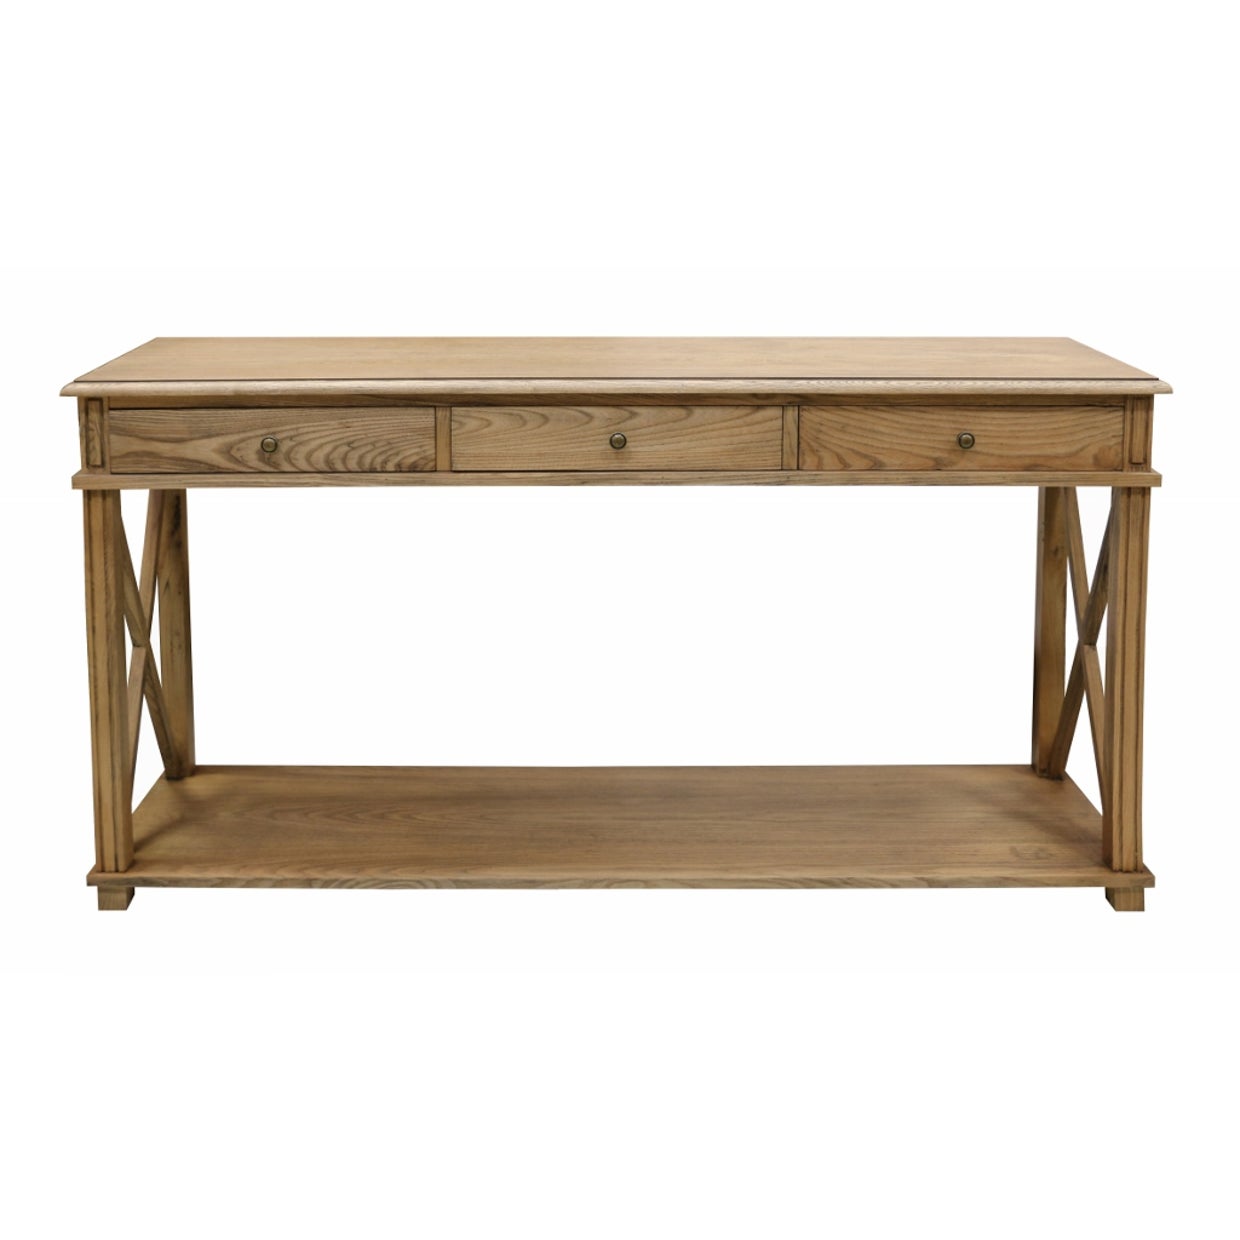 Natural Oak Console - 3 drawers